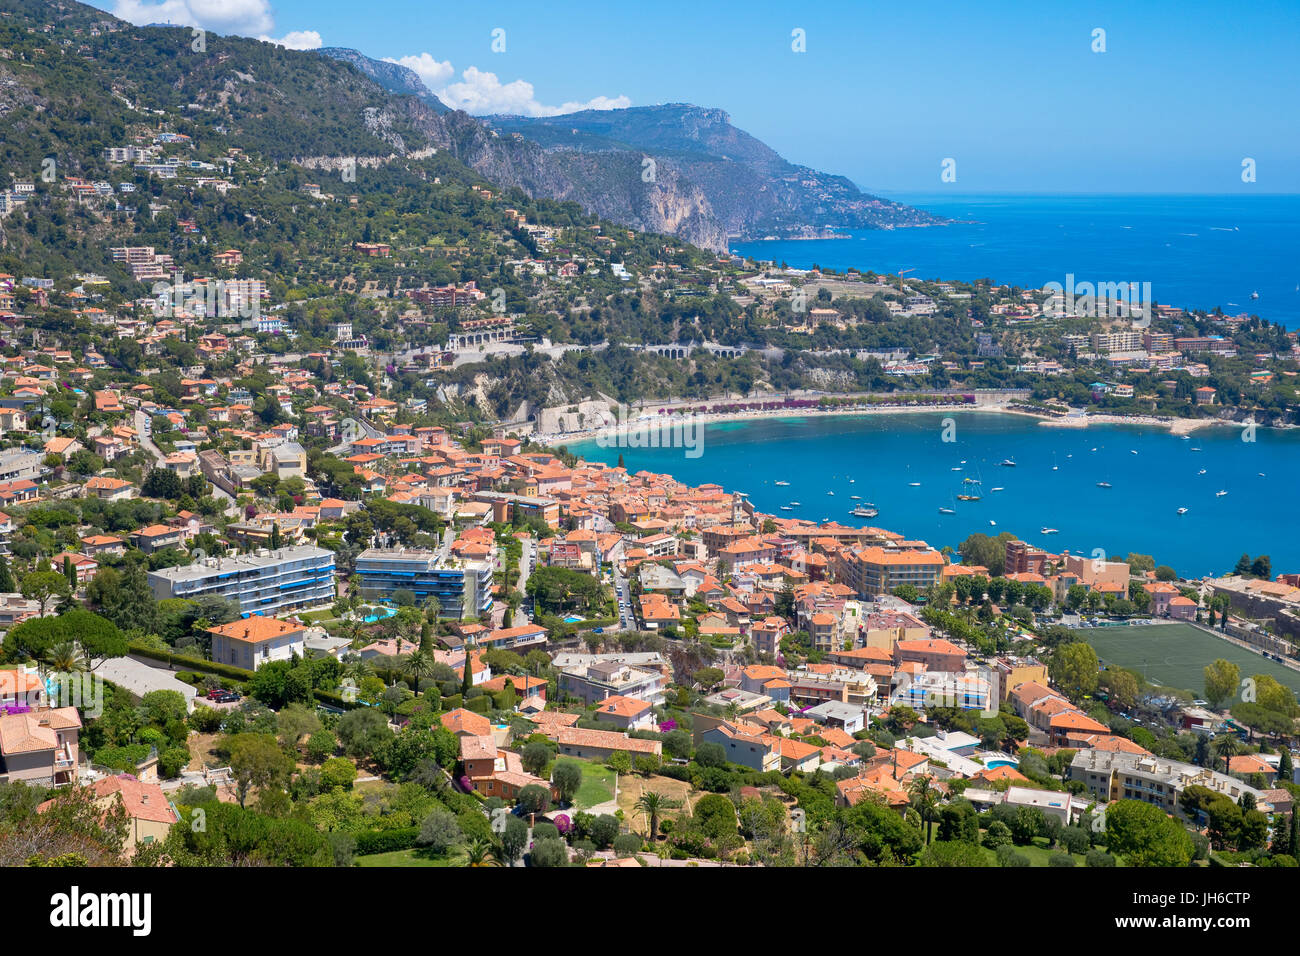 Panoramic view of Villefranche-sur-Mer and Saint-Jean-Cap-Ferrat near Nice, France Stock Photo